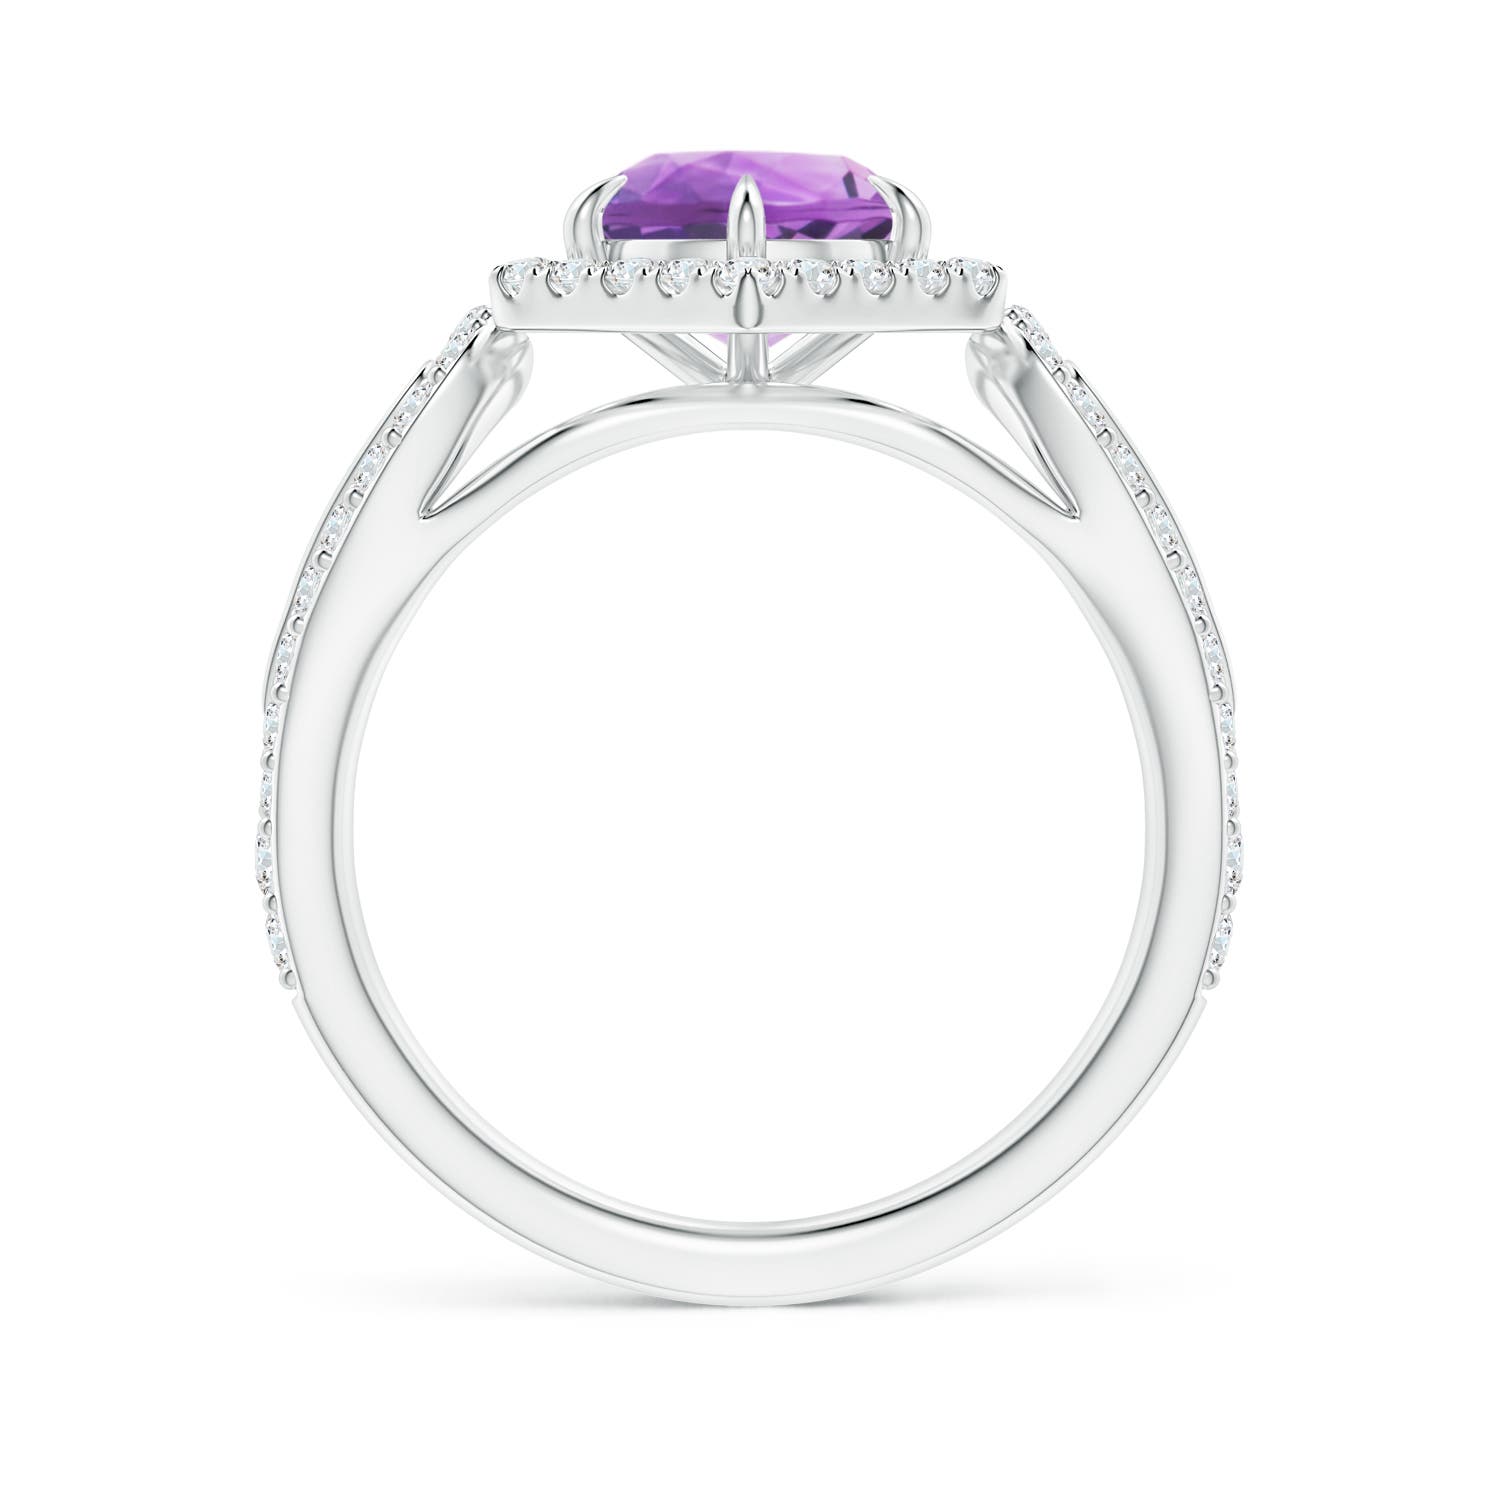 A - Amethyst / 1.75 CT / 14 KT White Gold